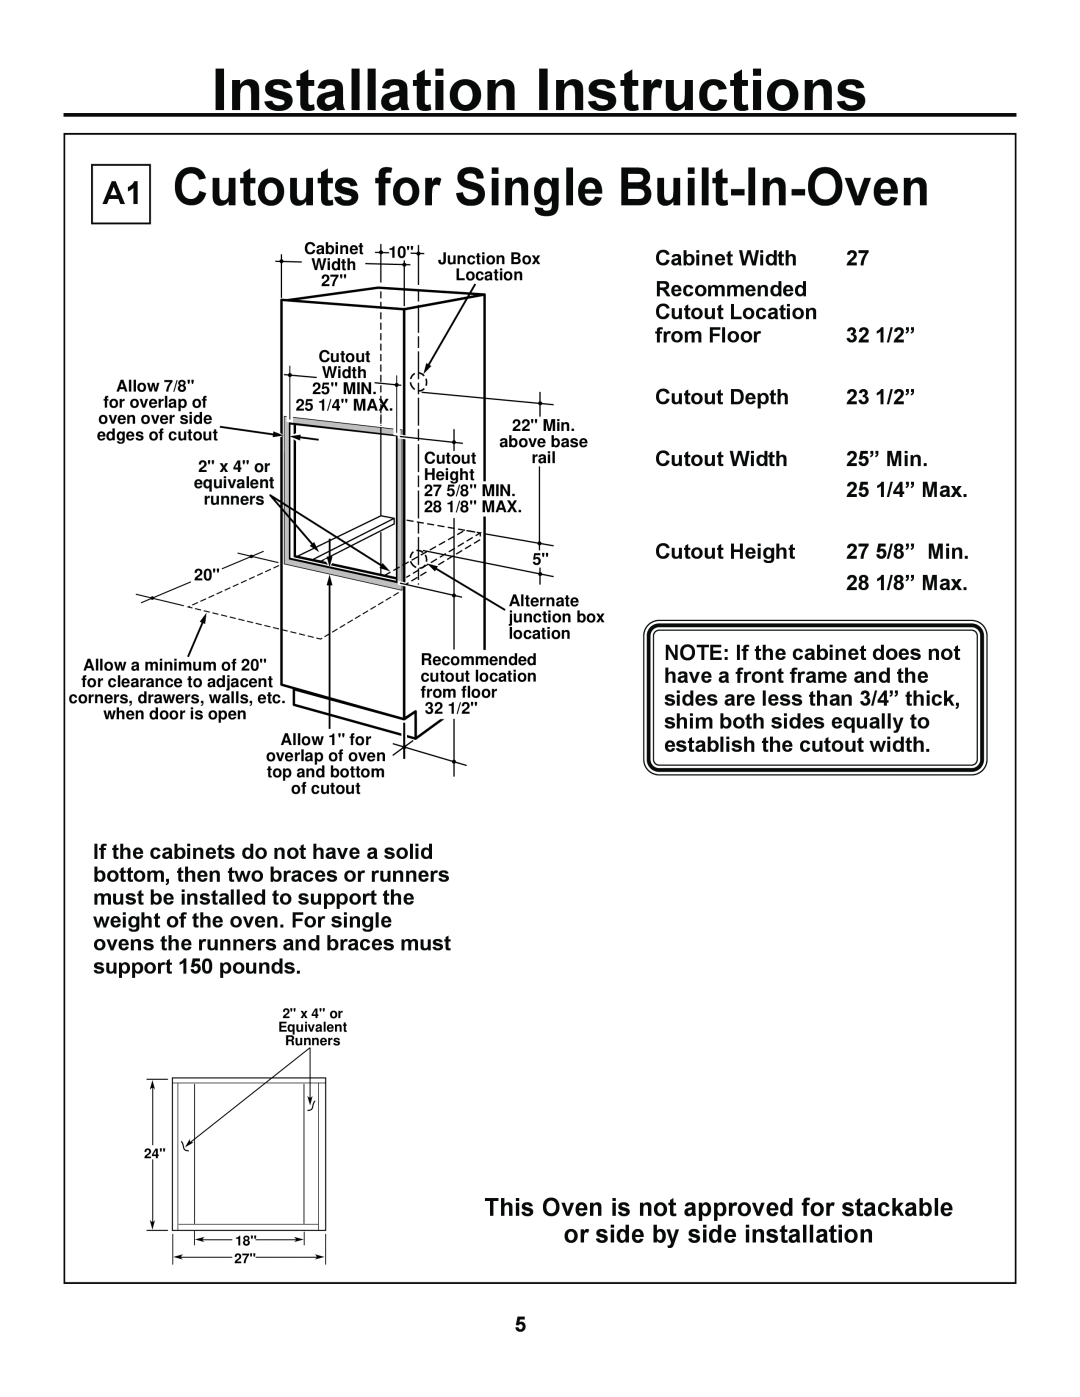 GE ZEK957, JKP27 Cutouts for Single Built-In-Oven, This Oven is not approved for stackable or side by side installation 